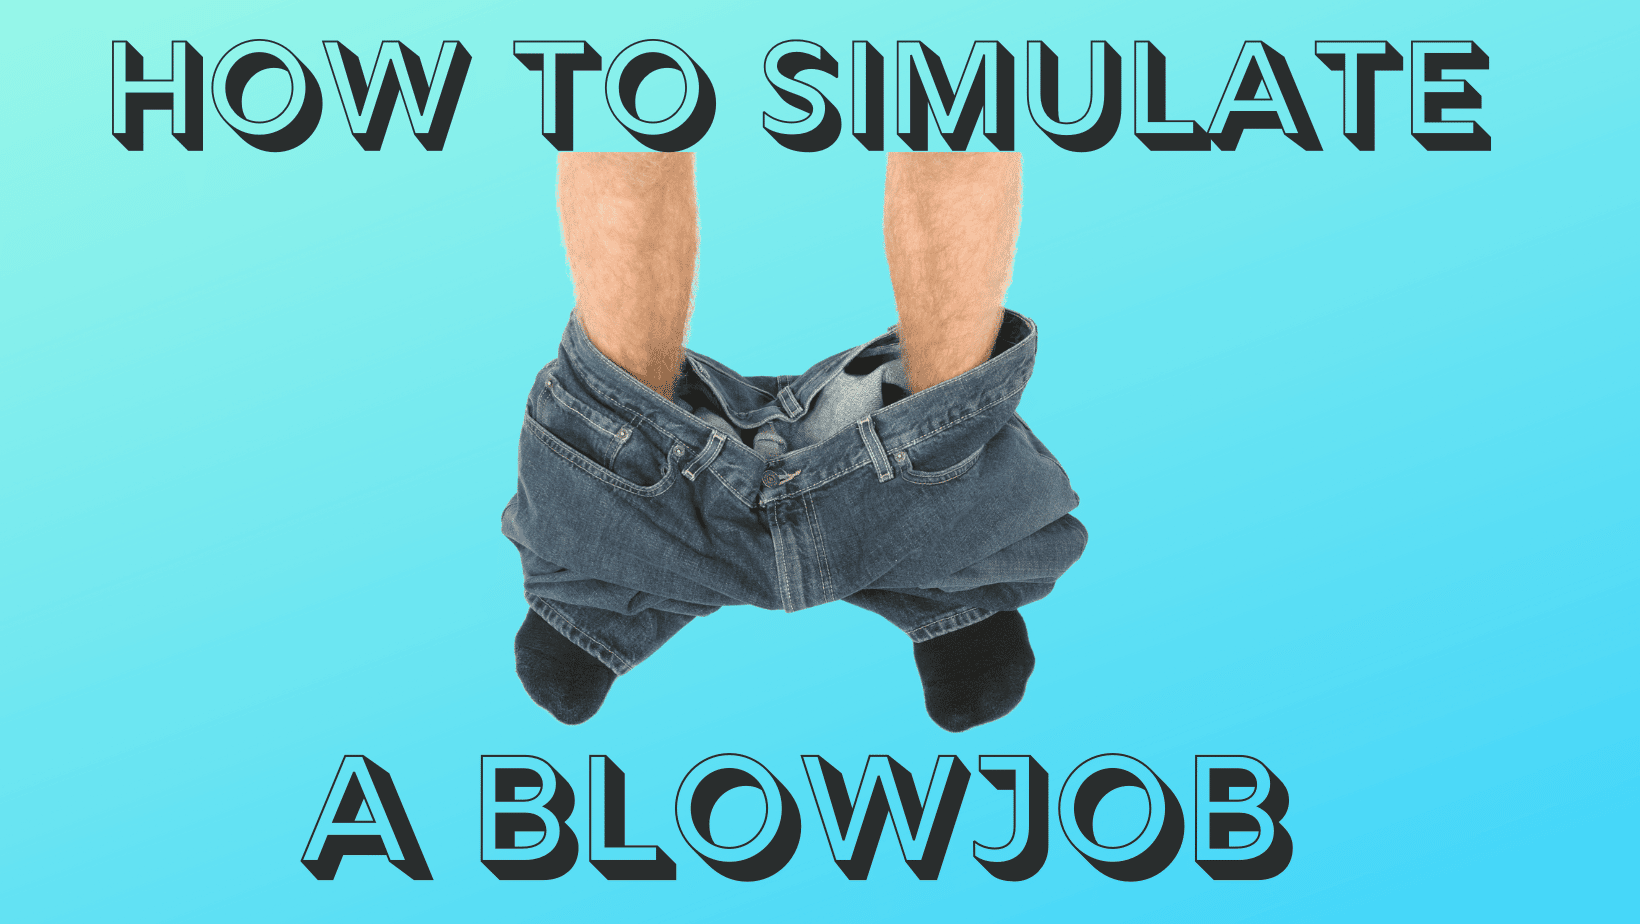 How to Simulate a Blowjob